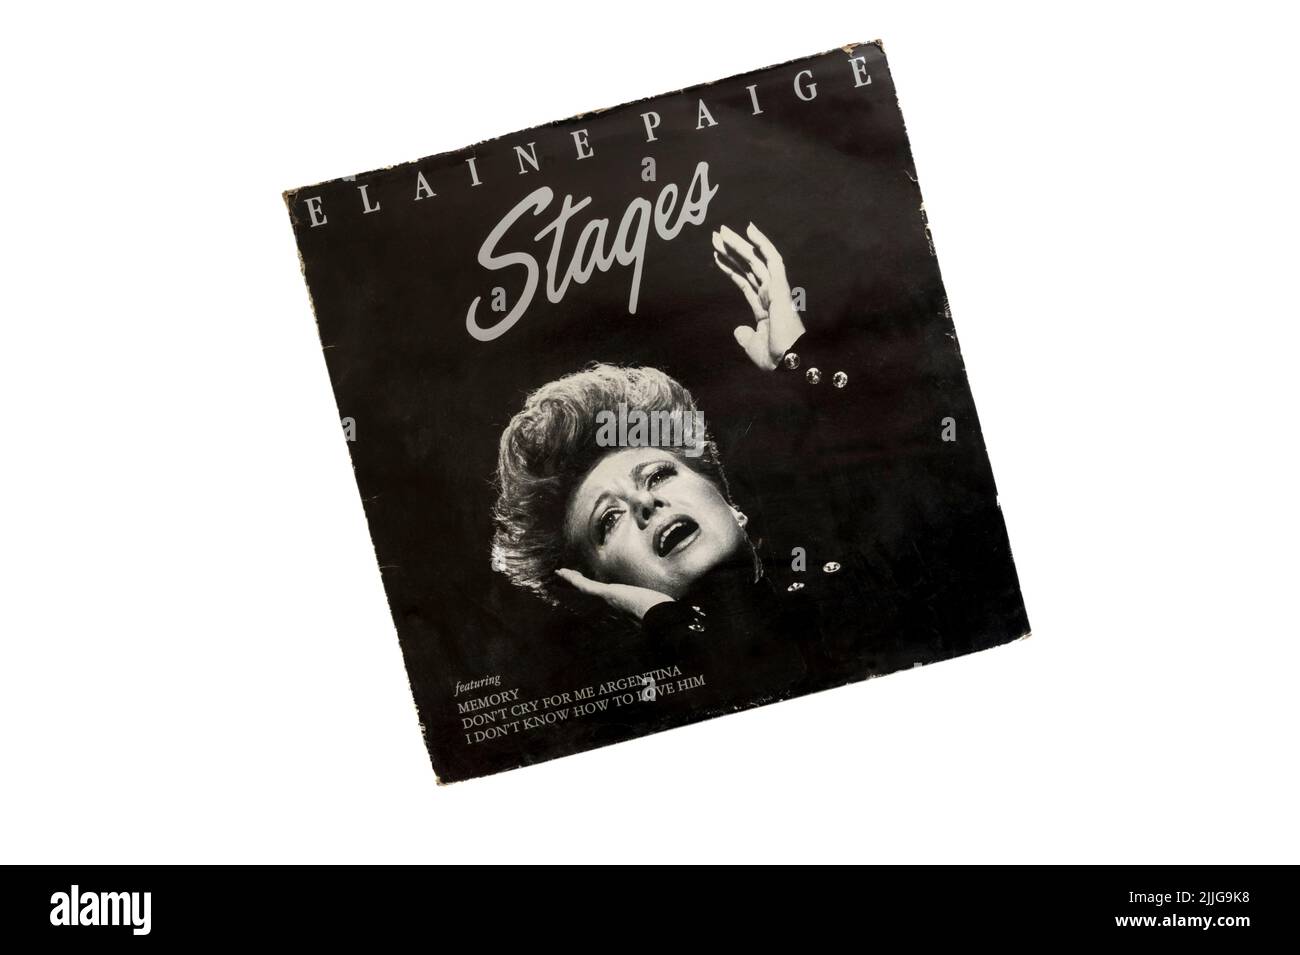 Stages by Elaine Paige was released in 1983. Stock Photo